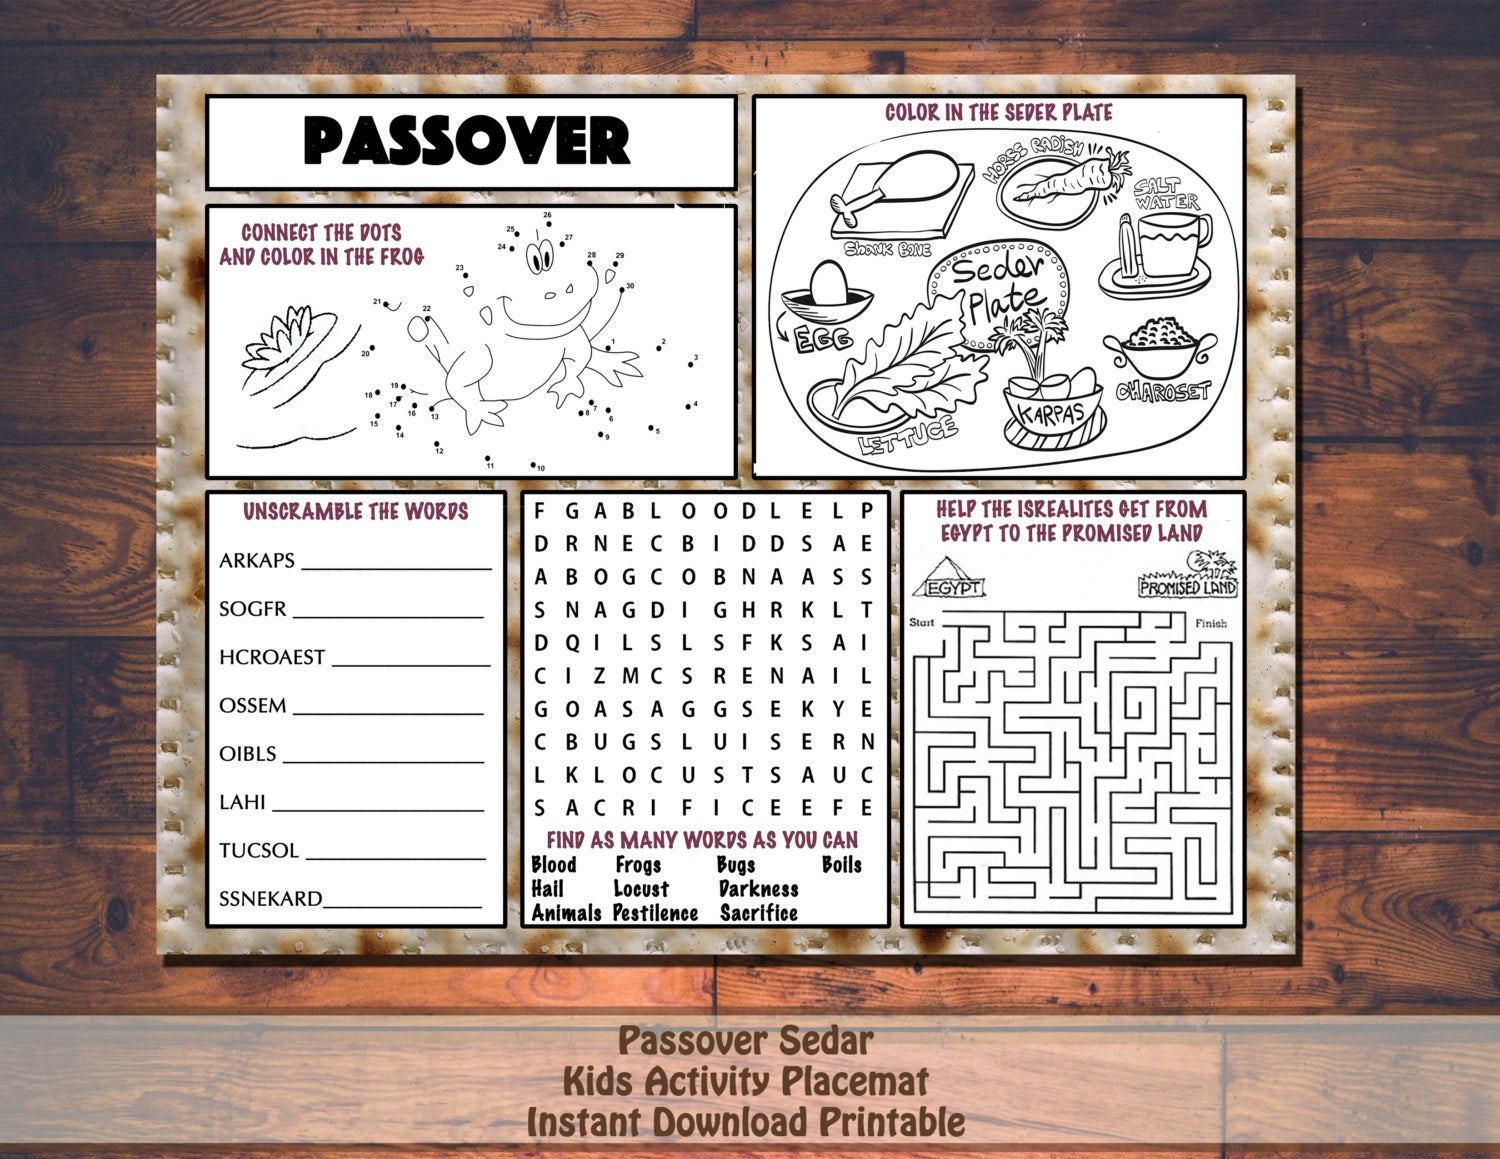 Passover Activities For Preschoolers
 Kids Passover Pesach Activity Printable Placemat Instant